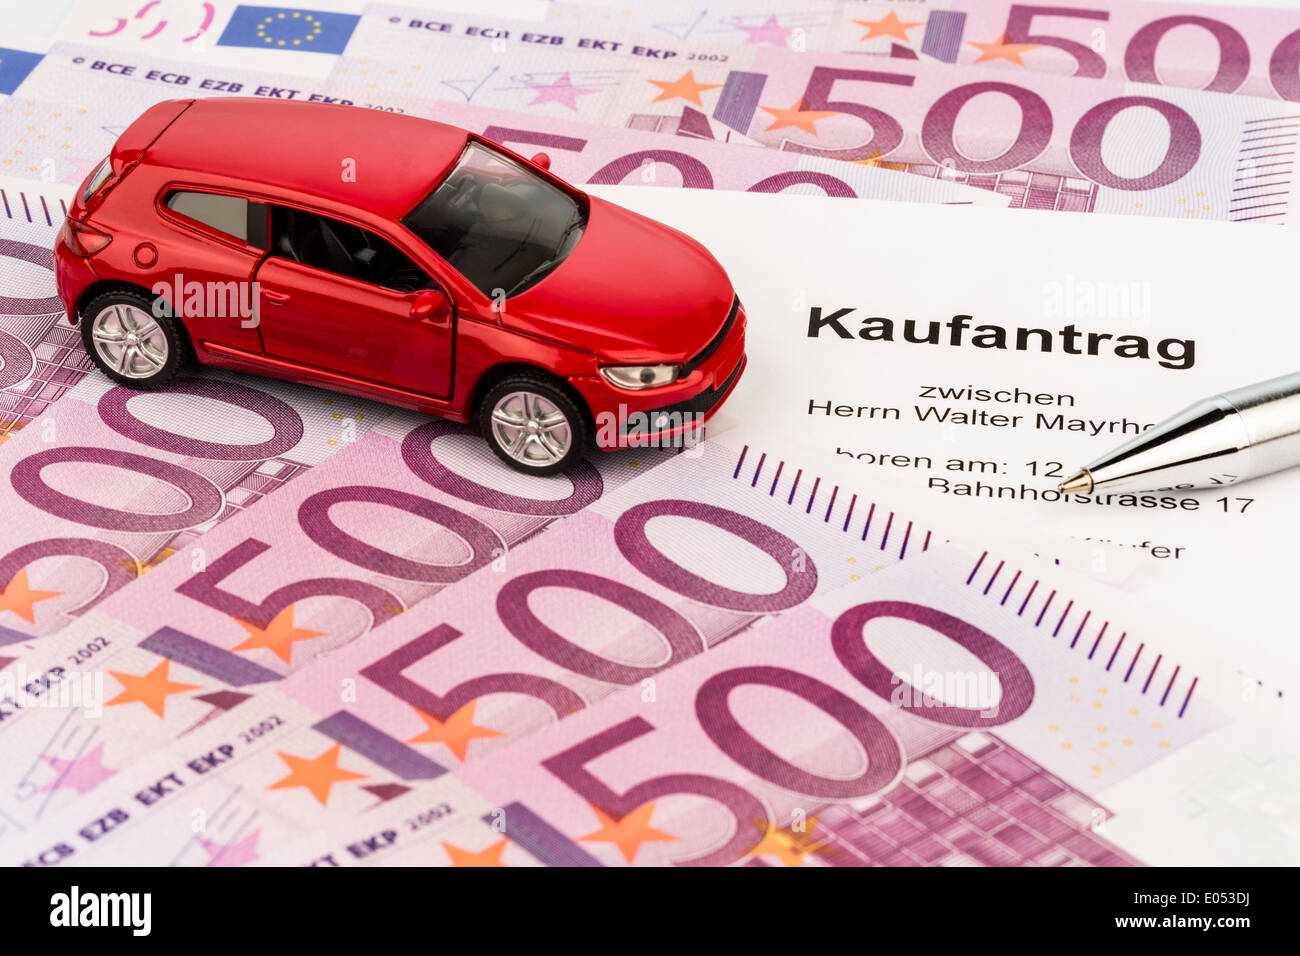 A bill of sale for an autopurchase with the car dealer. New carriages and used cars, Ein Kaufvertrag fuer einen Autokauf beim Au Stock Photo